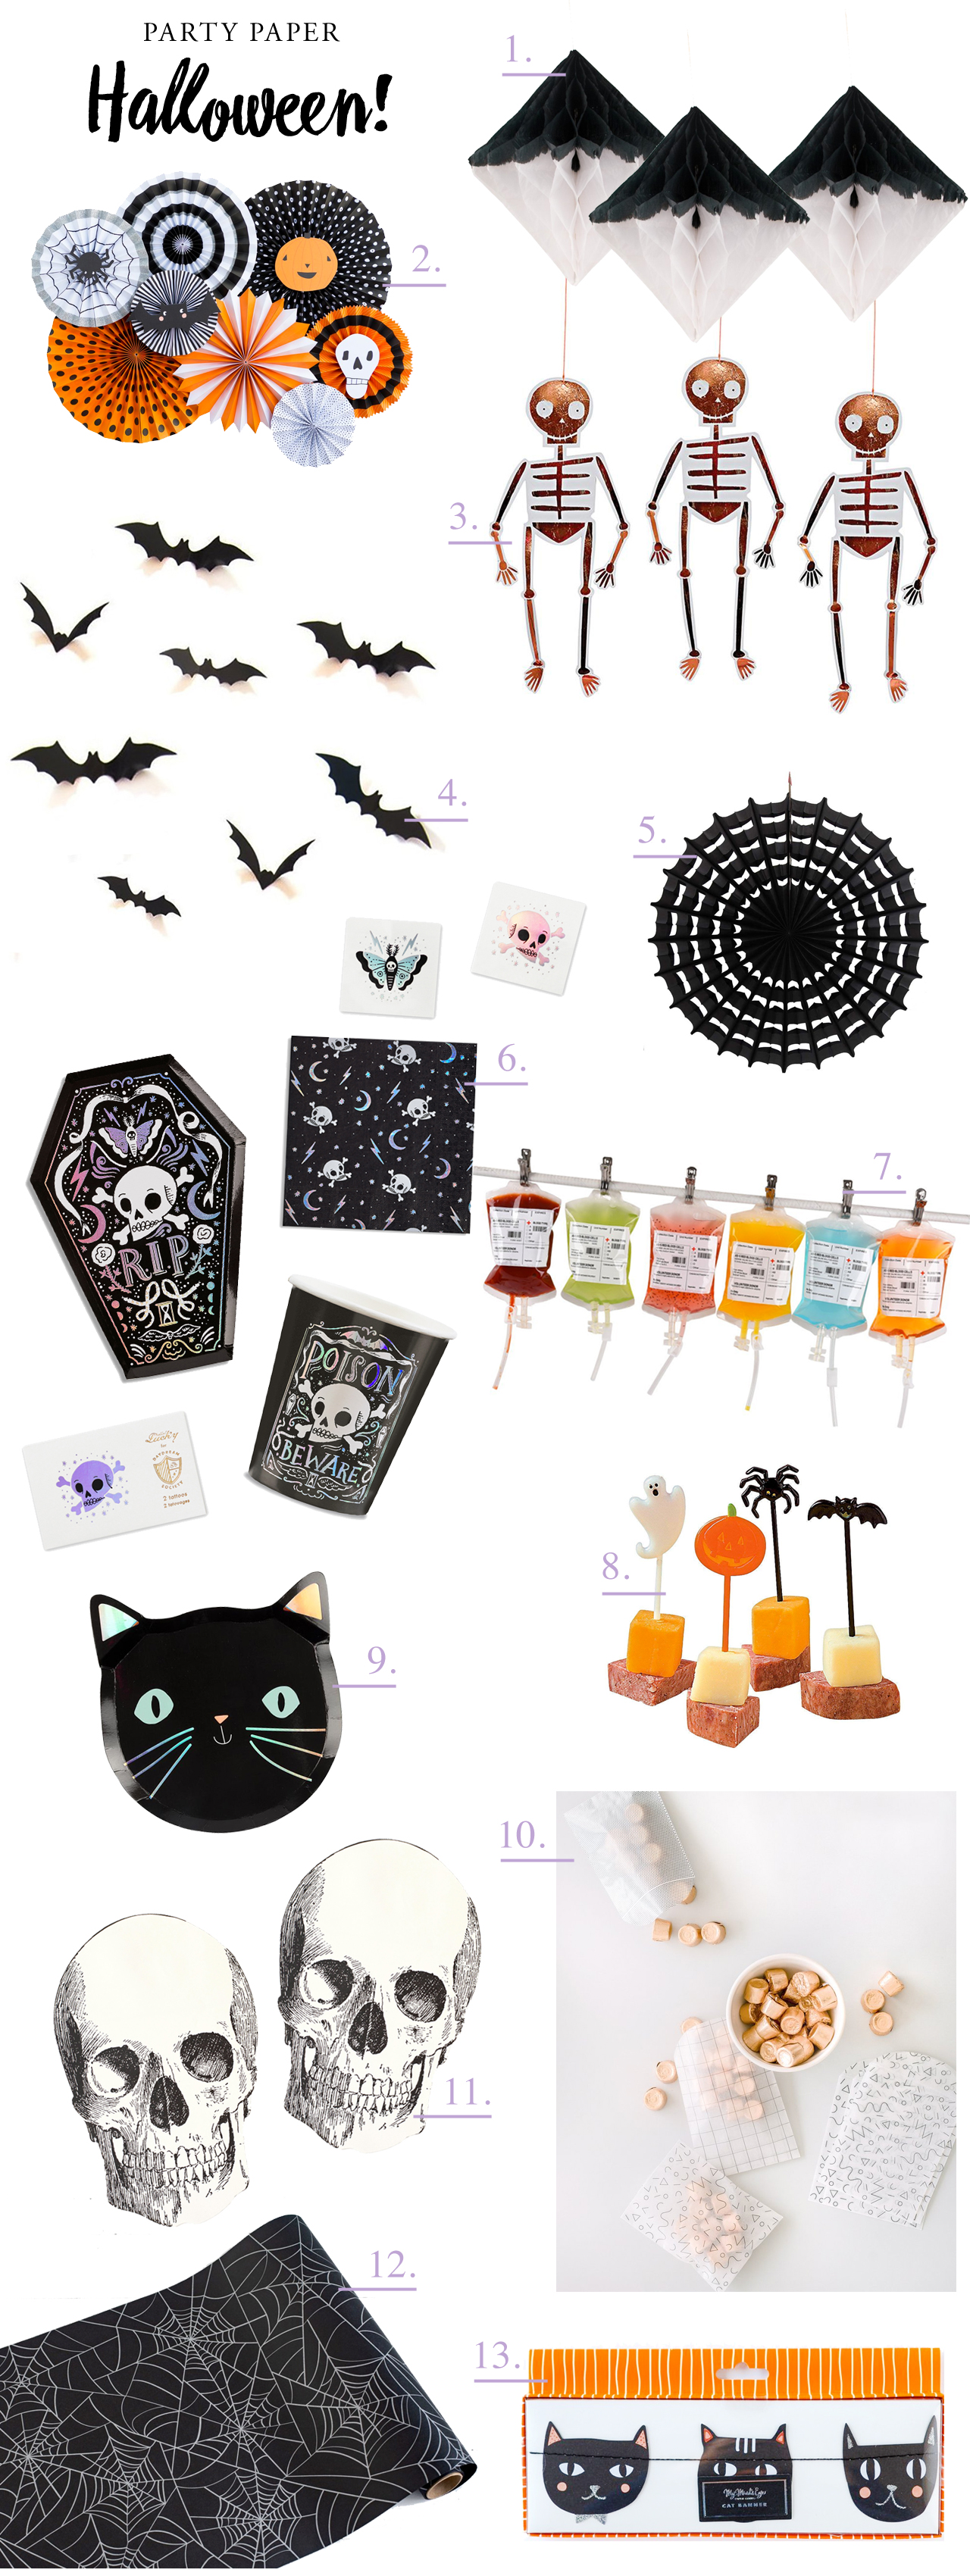 Cute and Quirky Halloween Party Décor